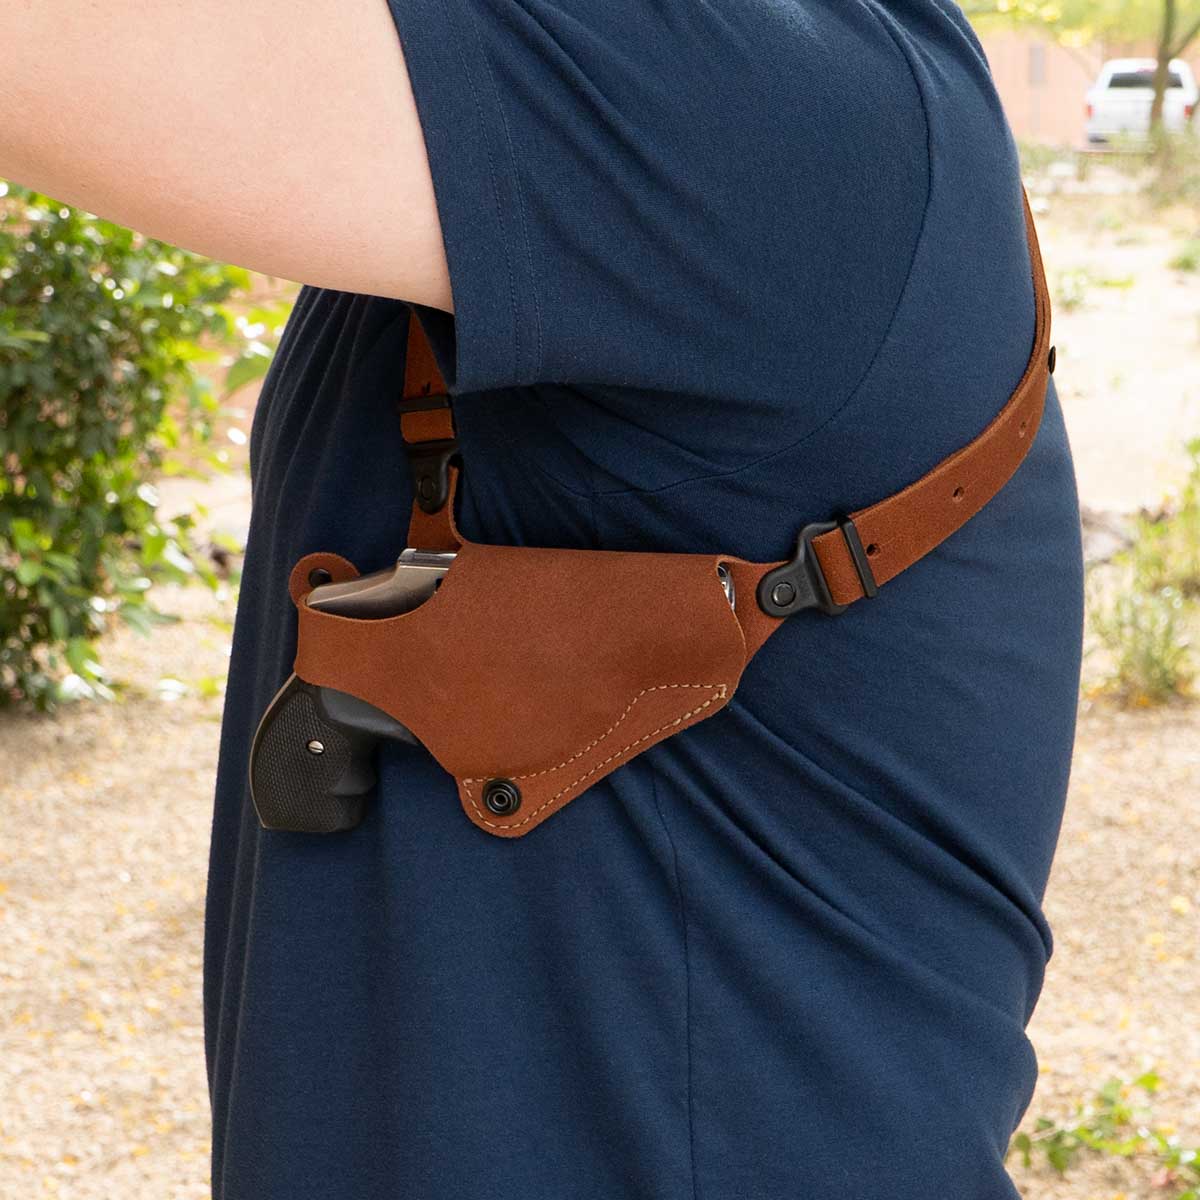 Details about   Galco Classic Lite 2.0 Shoulder Holster Fits Glock 43 43X 48  Right CL2-800 